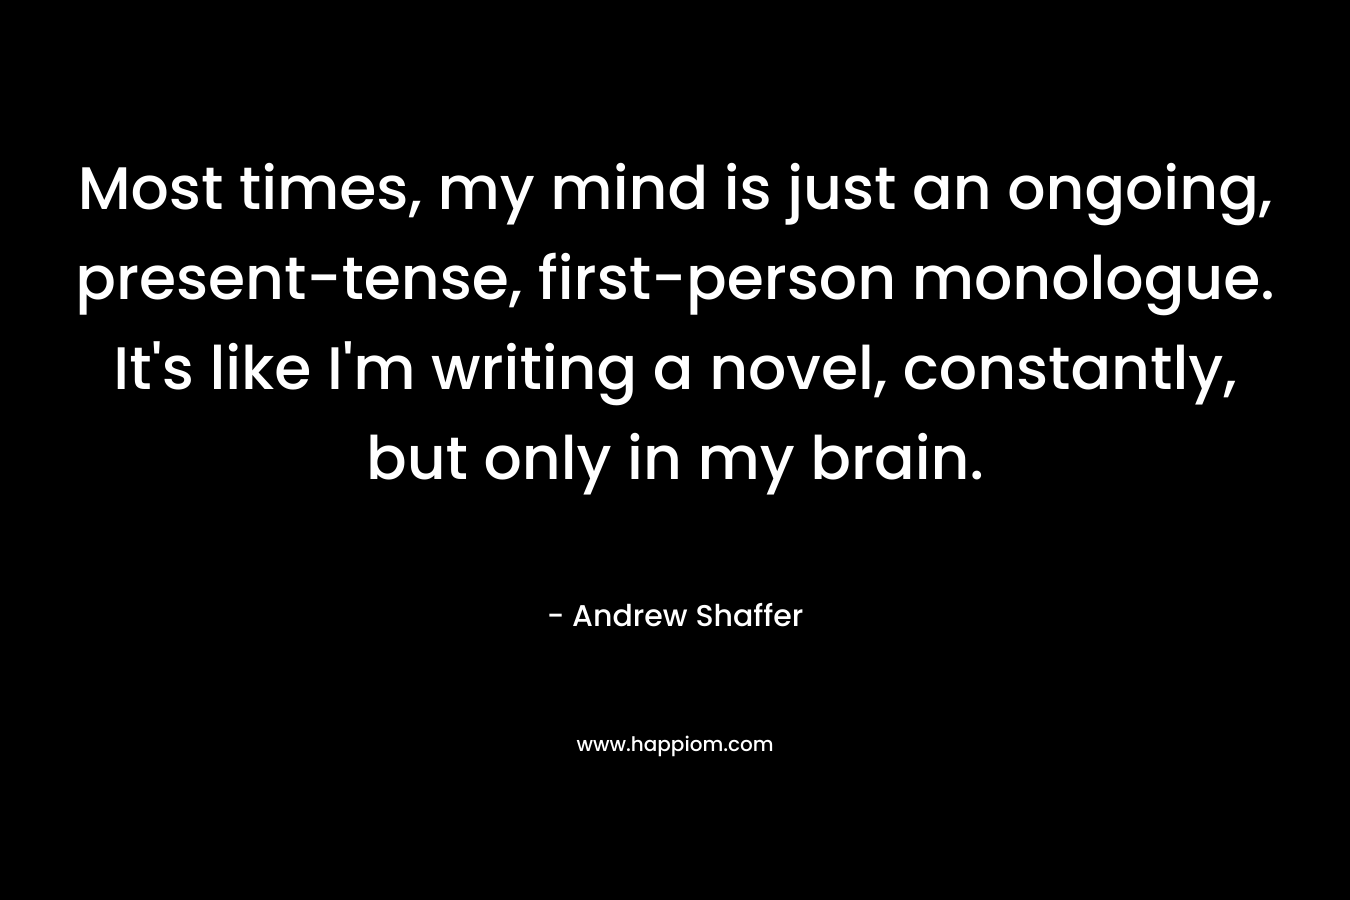 Most times, my mind is just an ongoing, present-tense, first-person monologue. It’s like I’m writing a novel, constantly, but only in my brain. – Andrew Shaffer